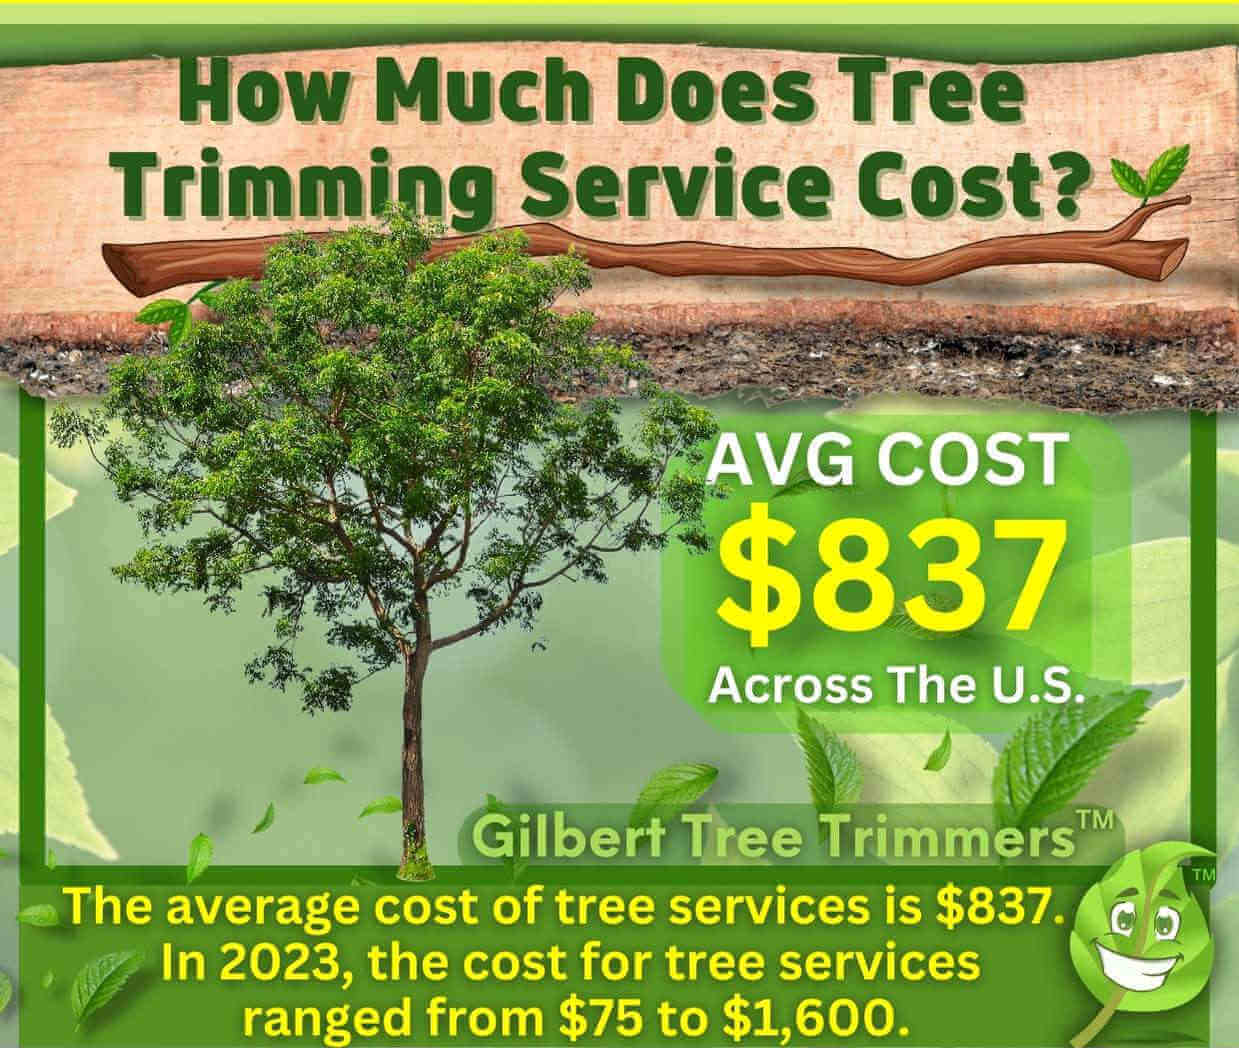 How Much Is Tree Trimming Service Cost?